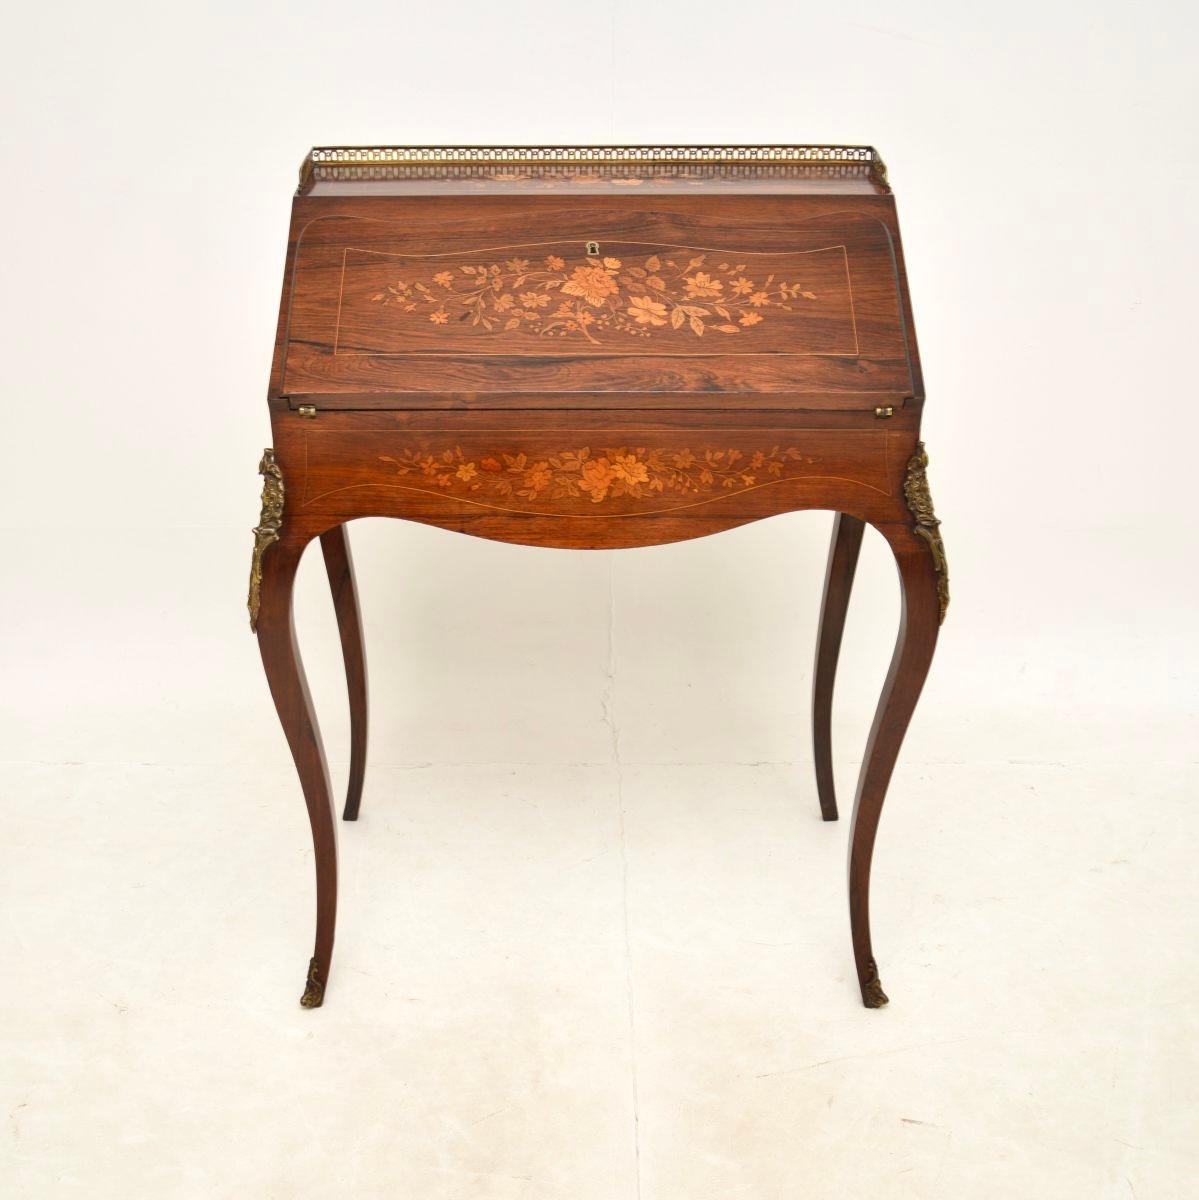 A stunning antique French bureau, dating from around the 1890-1910 period.

It is of extremely fine quality, standing on slender yet sturdy cabriole legs and with gorgeous inlaid floral patterns. There are high quality ormolu mounts and this